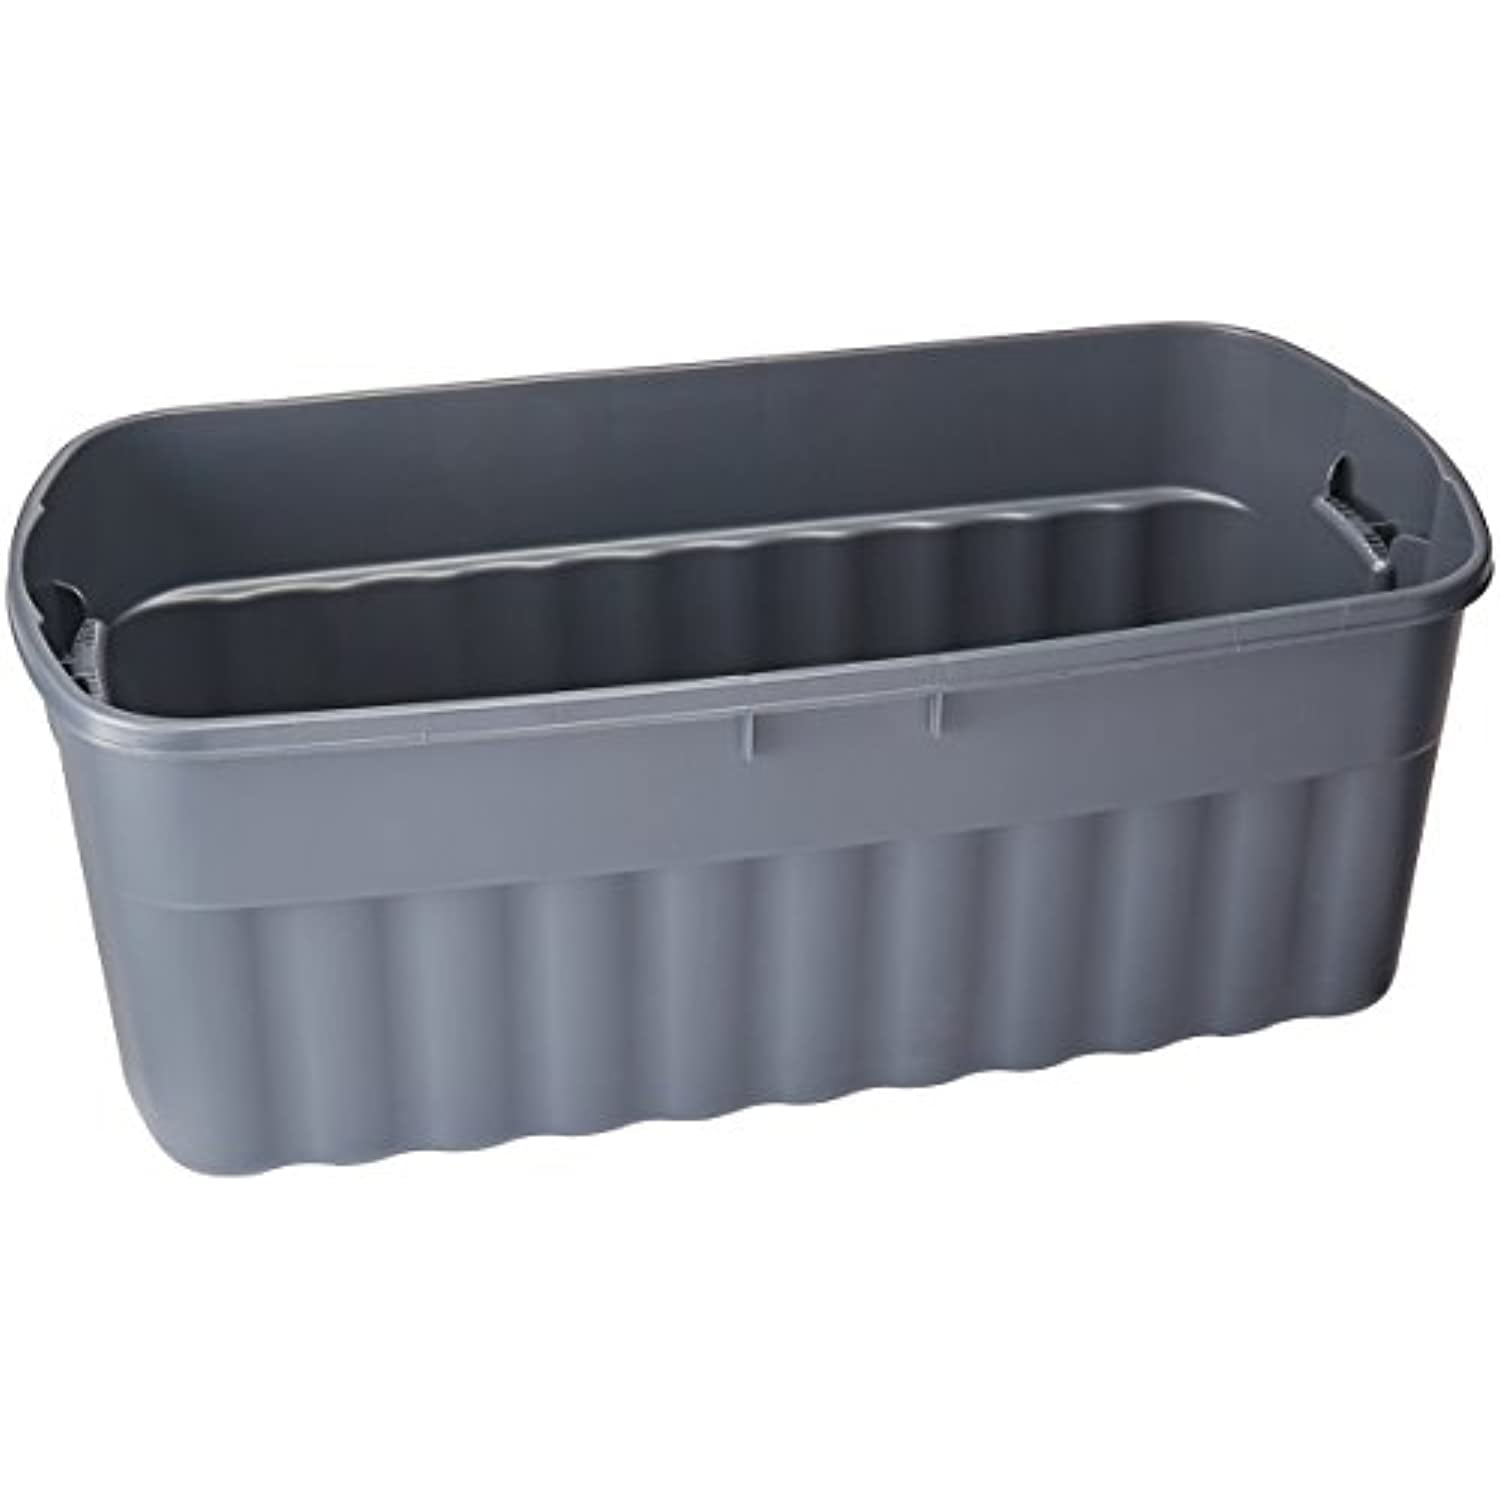  Rubbermaid Roughneck️ 50 Gallon Storage Totes, Durable,  Stackable Storage Containers with Lids, Great for Home, Office, and Garage  Organization, Grey Base and Dark Indigo Metallic Lid, Pack of 2 : Tools